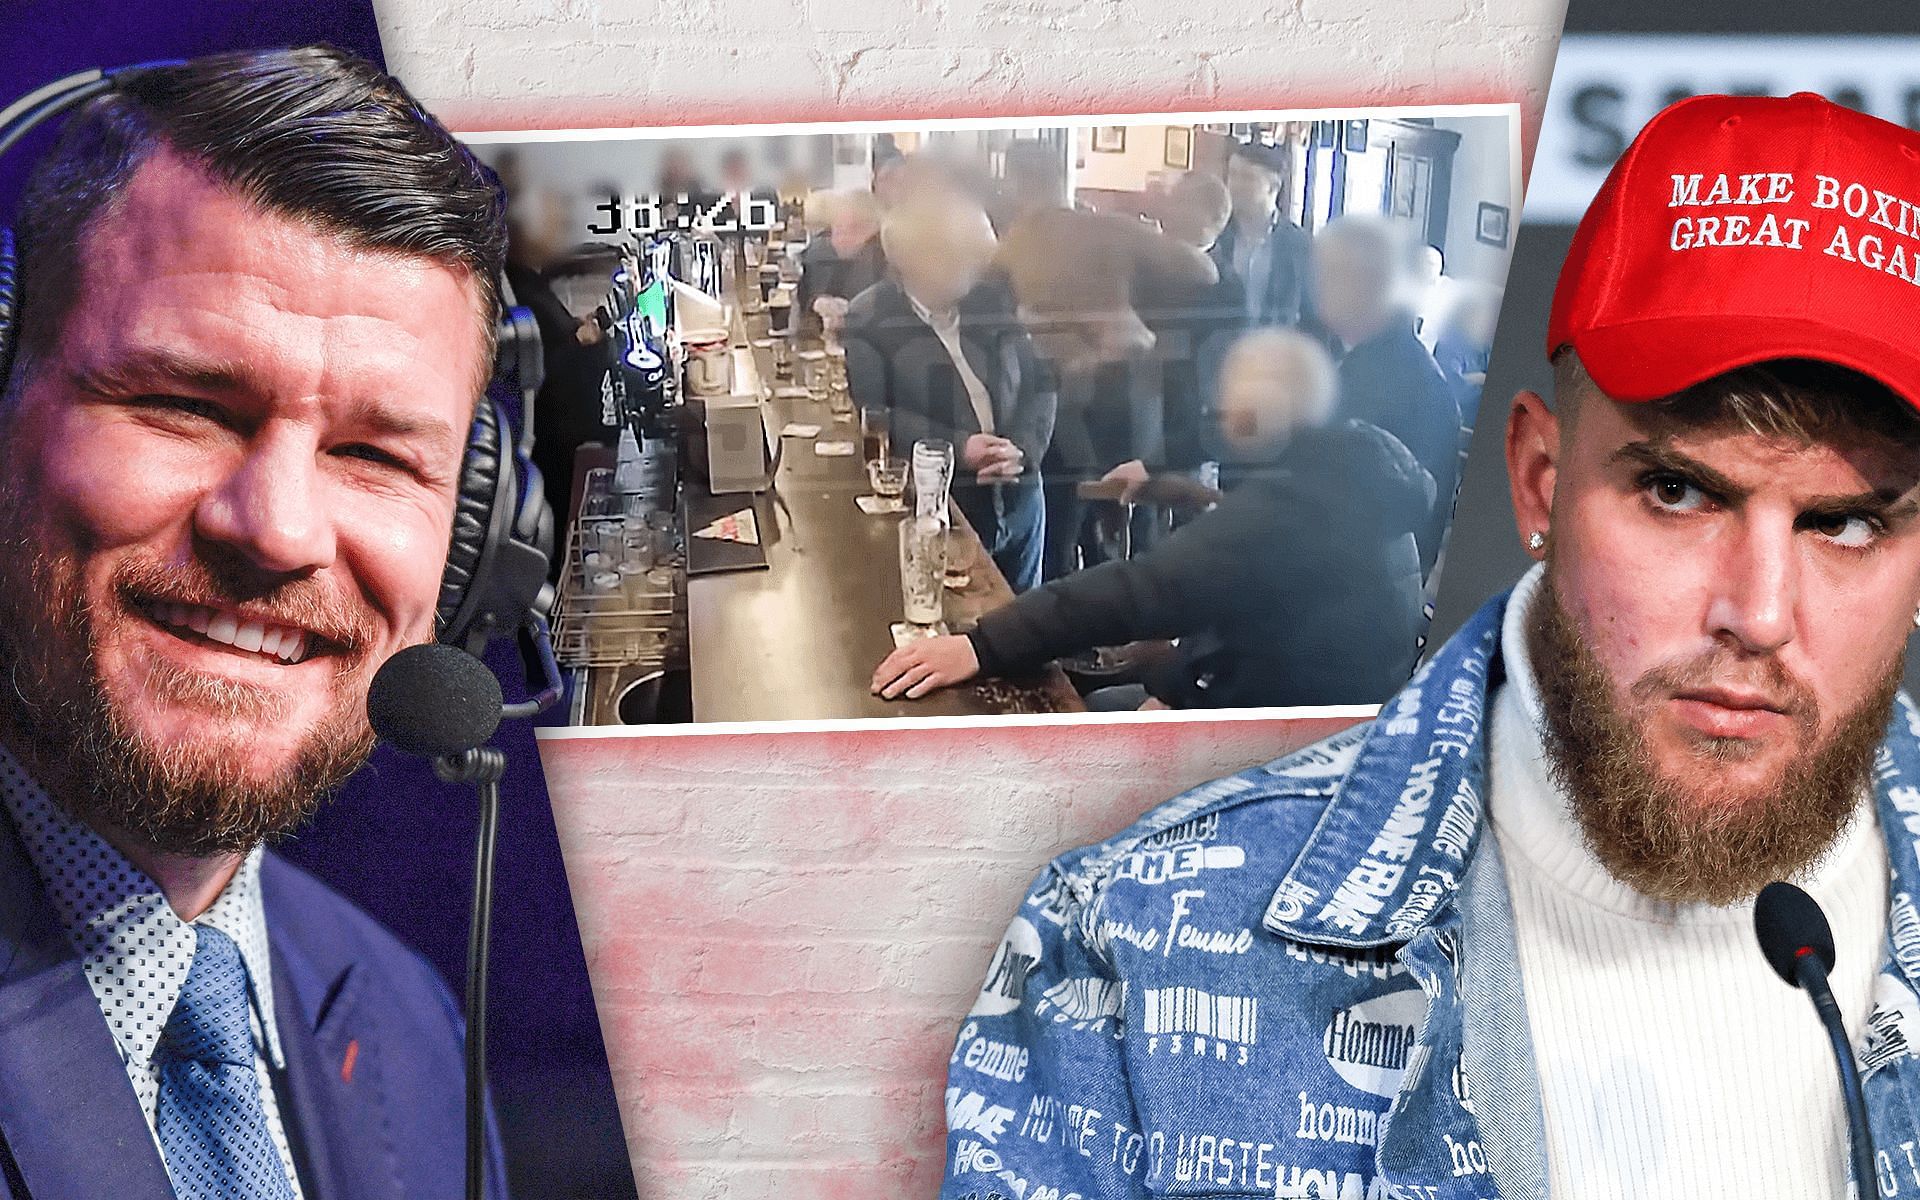 Michael Bisping (left), the infamous bar incident involving Conor McGregor (center), Jake Paul (right) [Center image via TMZ Sports on YouTube]